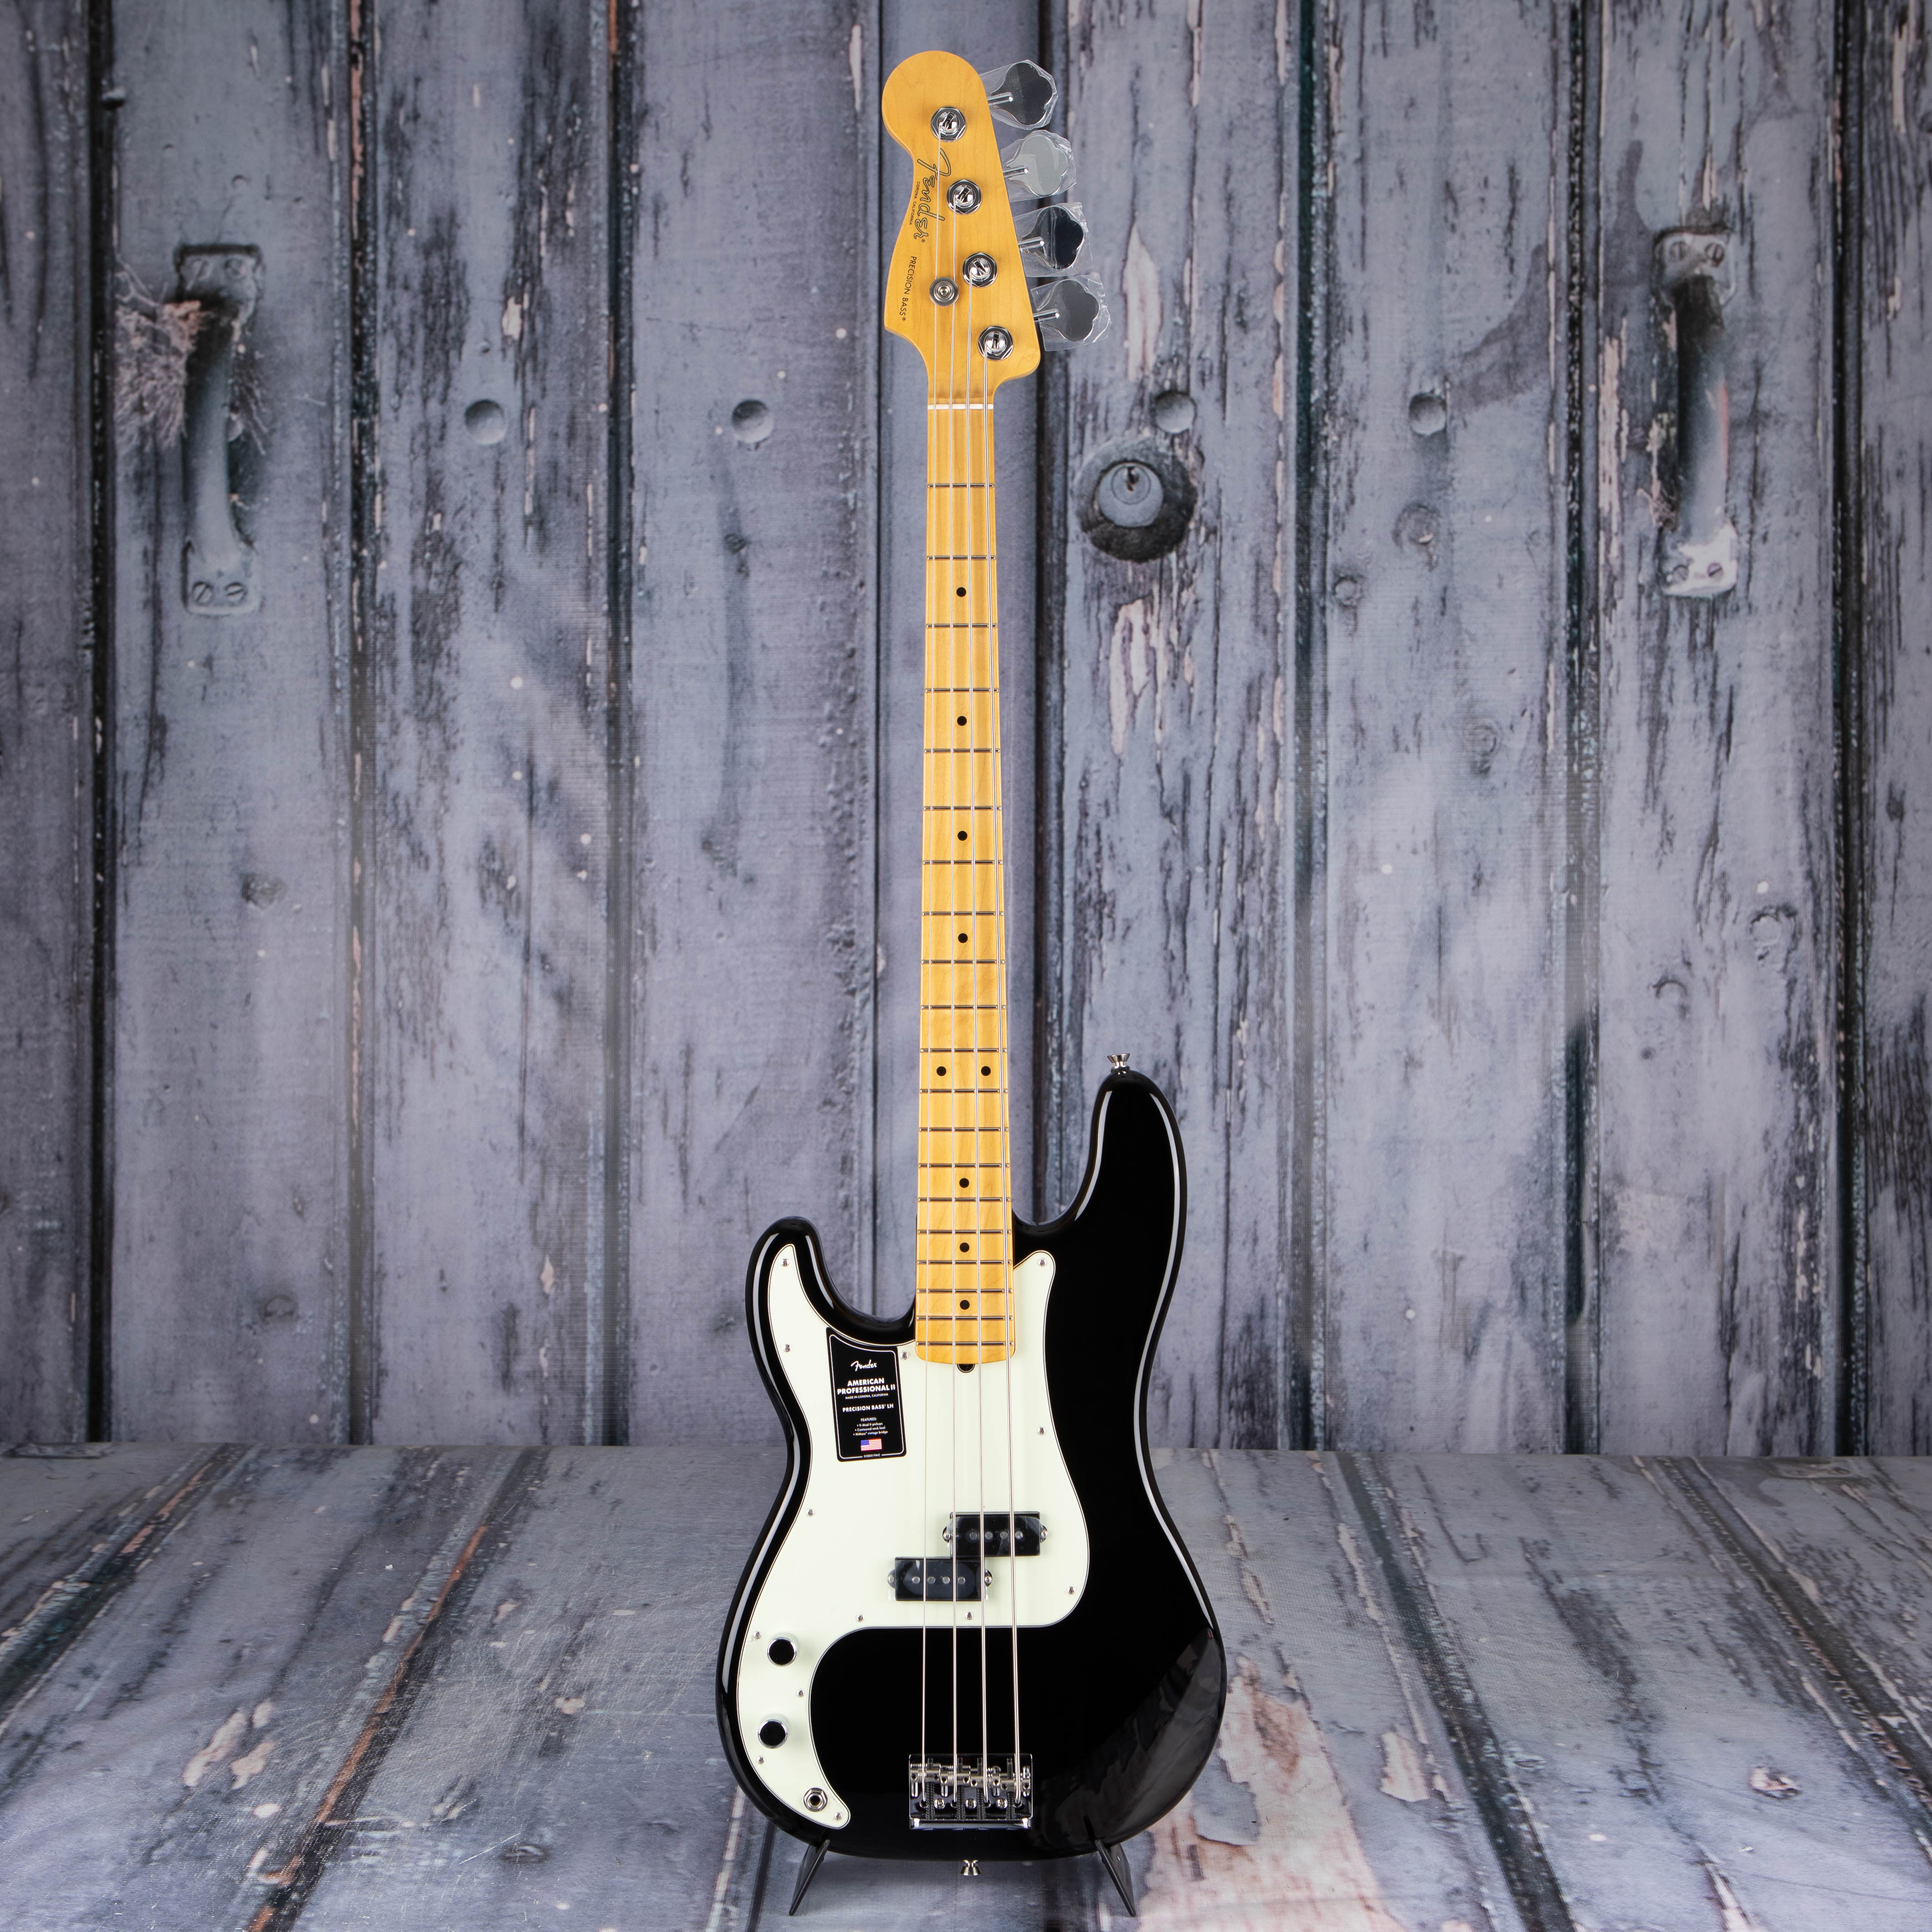 Fender American Professional II Precision Bass Left-Handed Guitar, Black, front